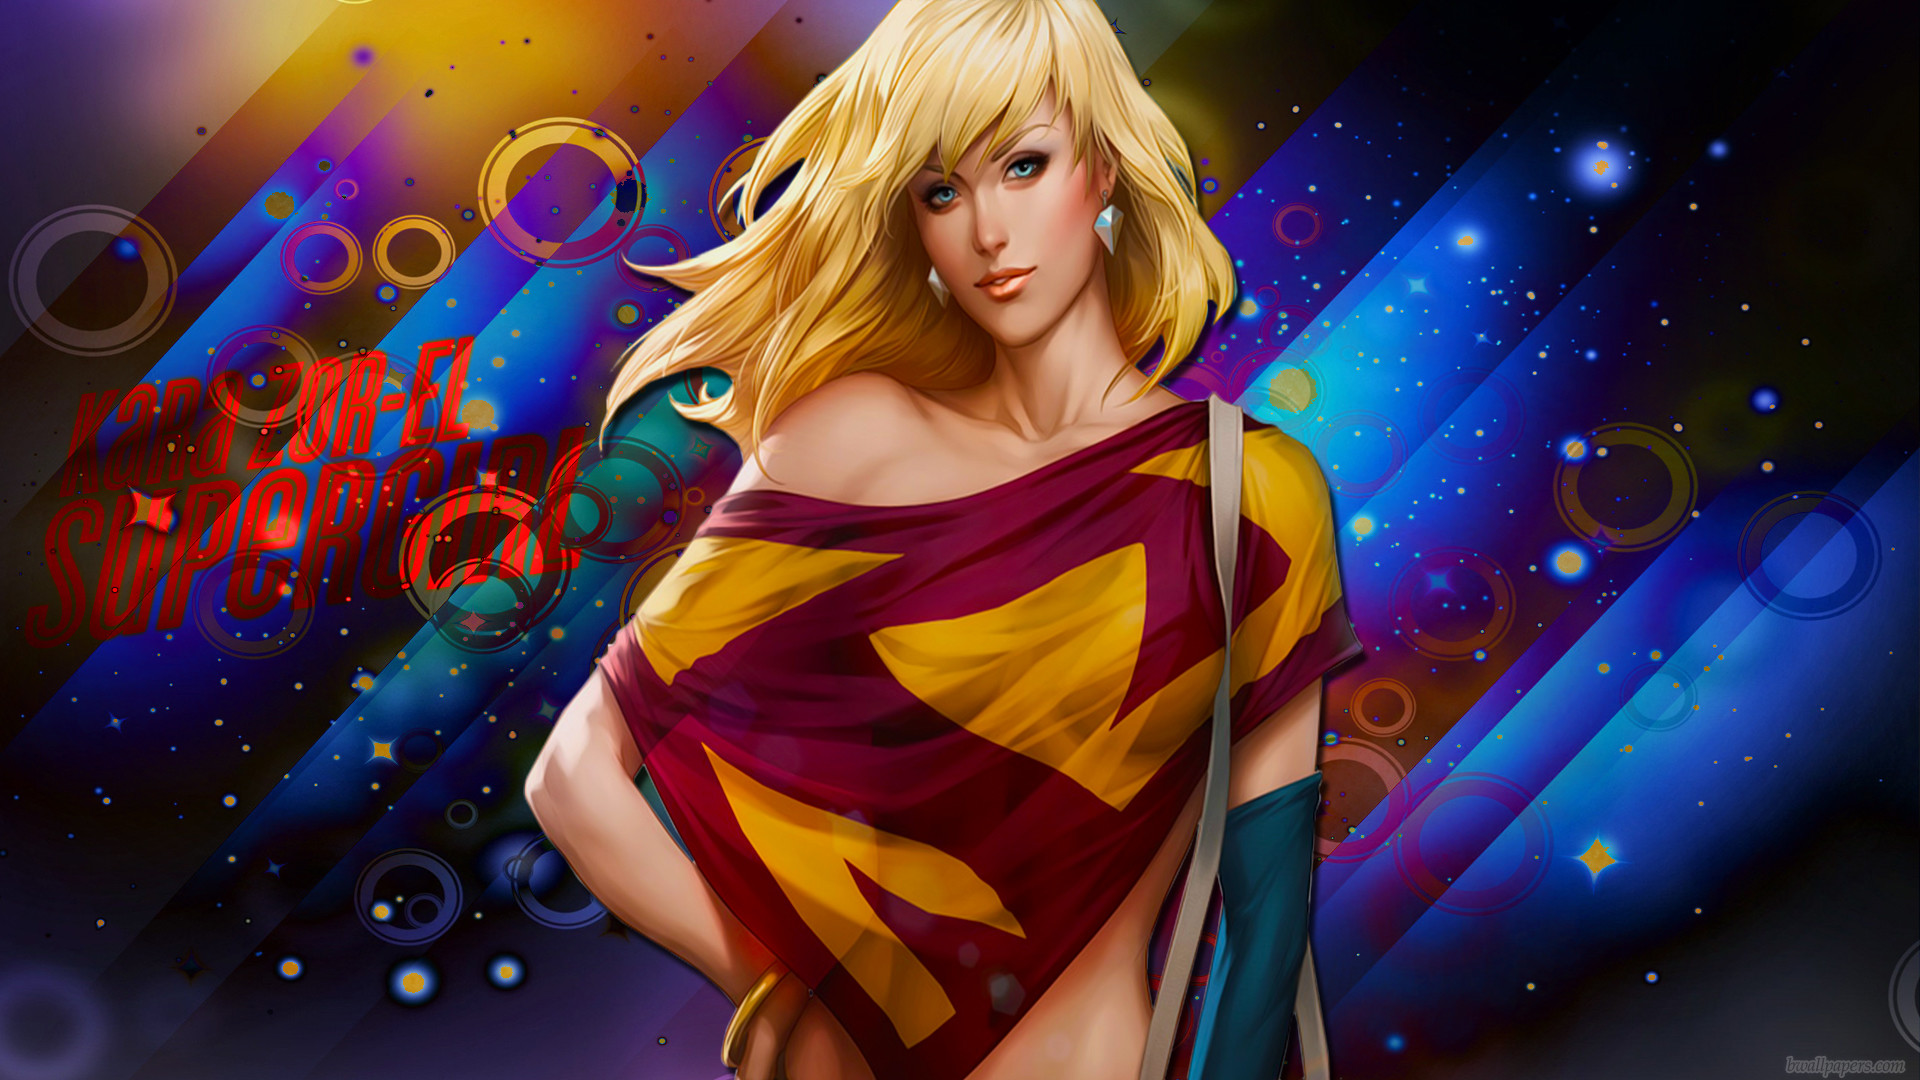 1920x1080 Supergirl Backgrounds - Wallpaper, High Definition, High Quality .